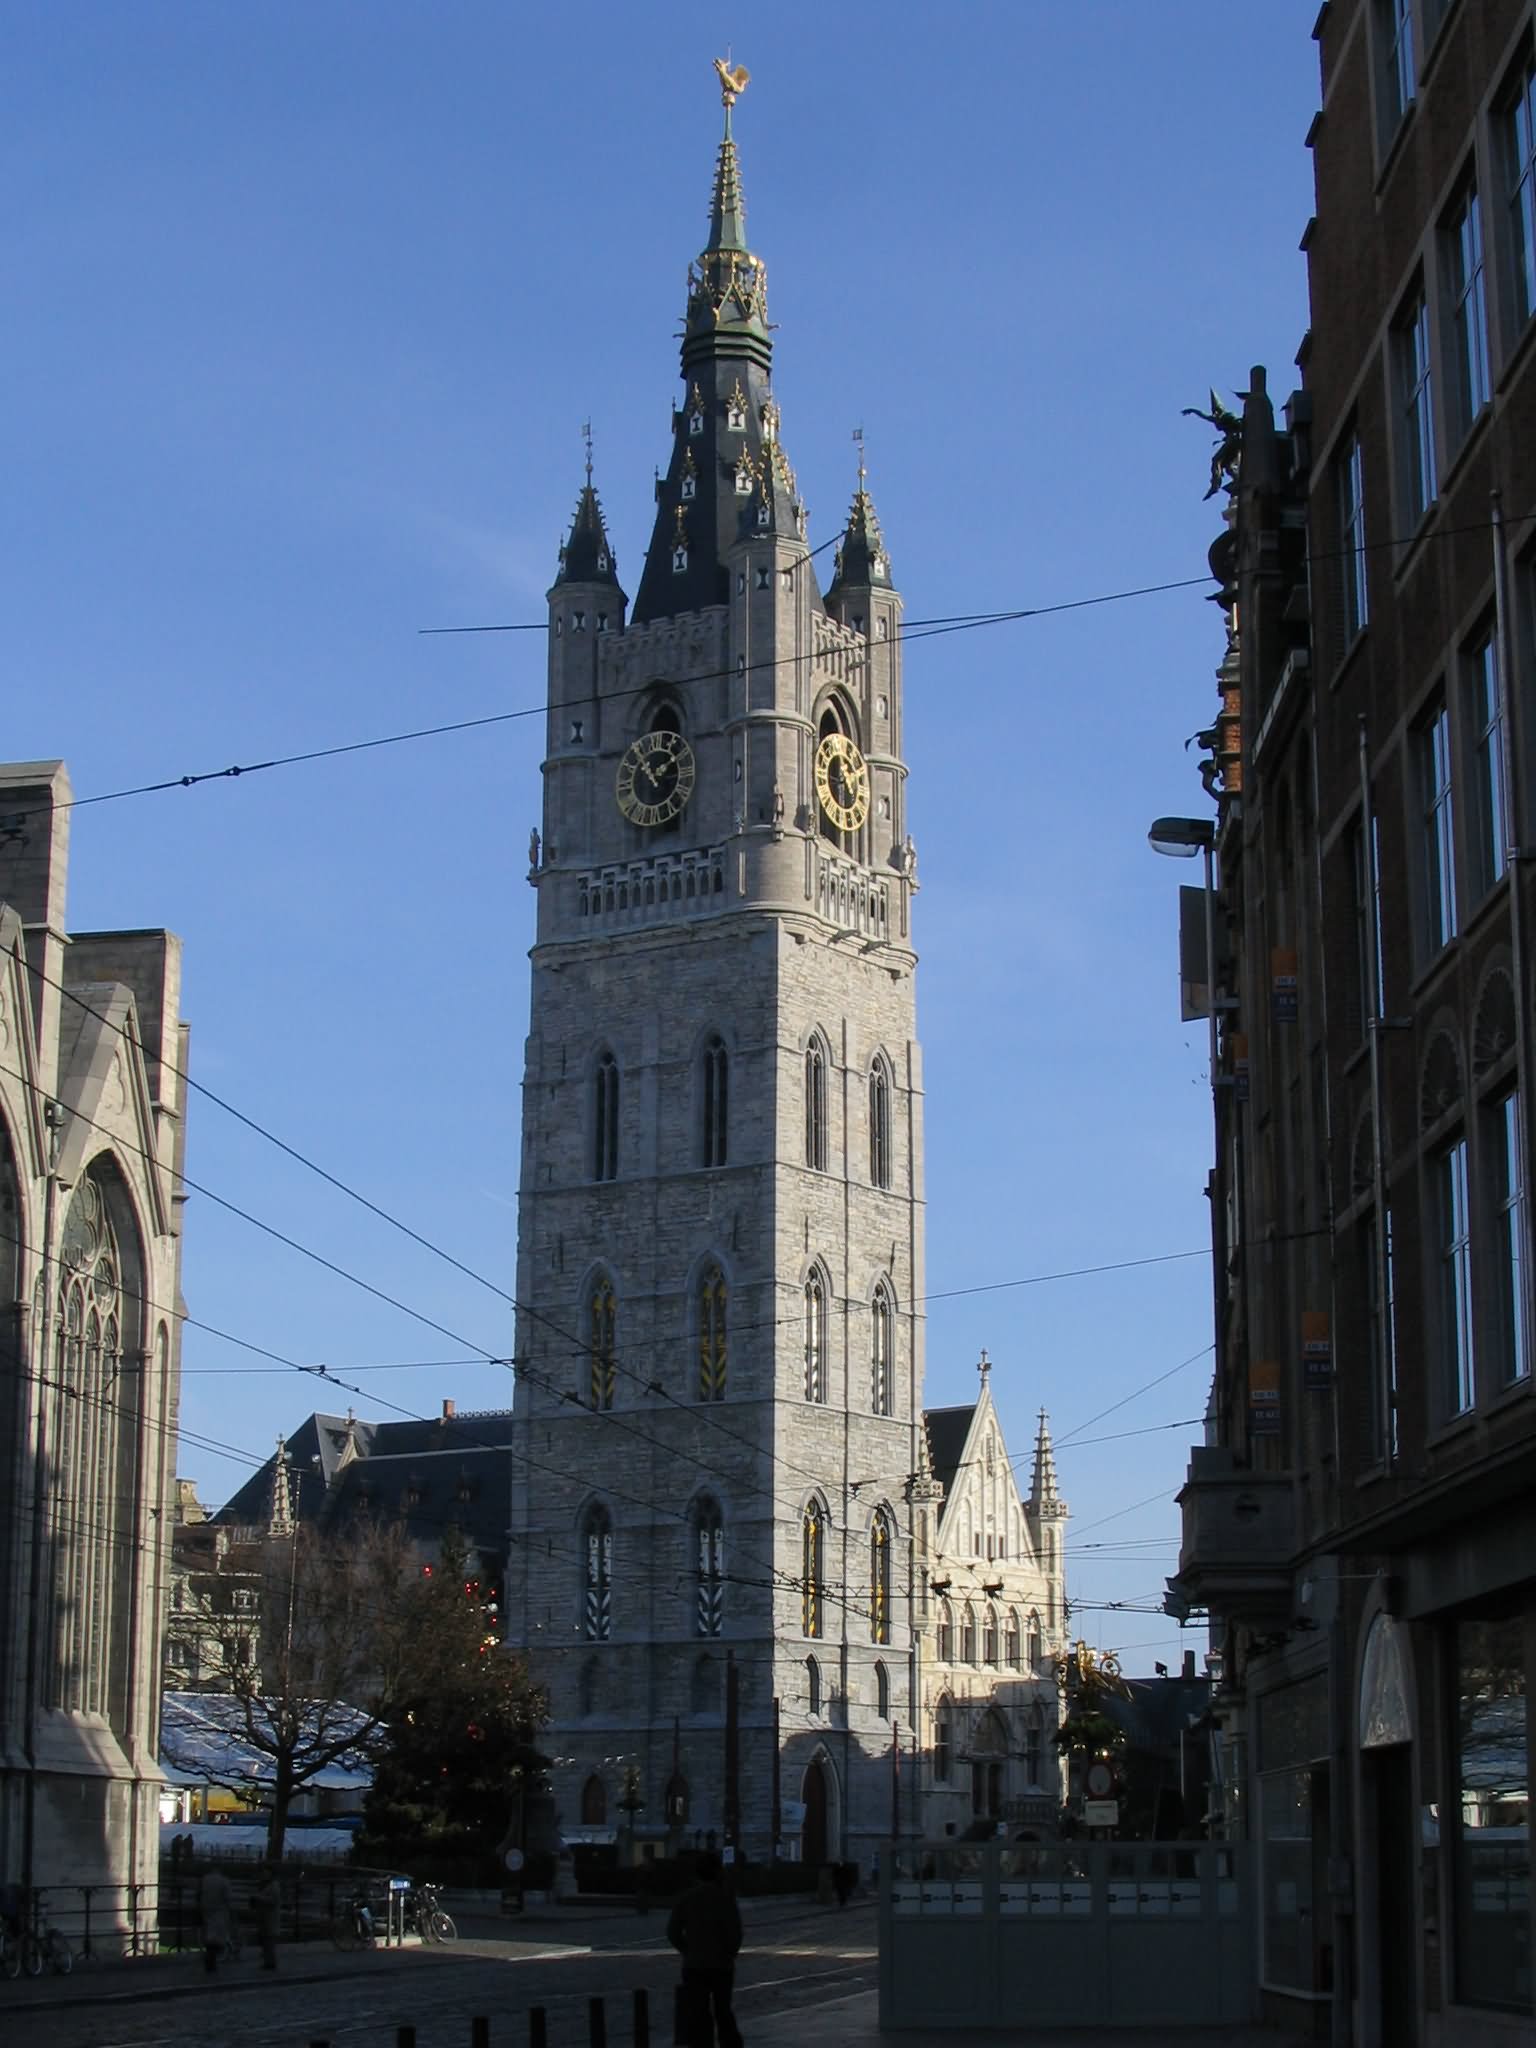 Beautiful Picture Of The Belfry Of Ghent